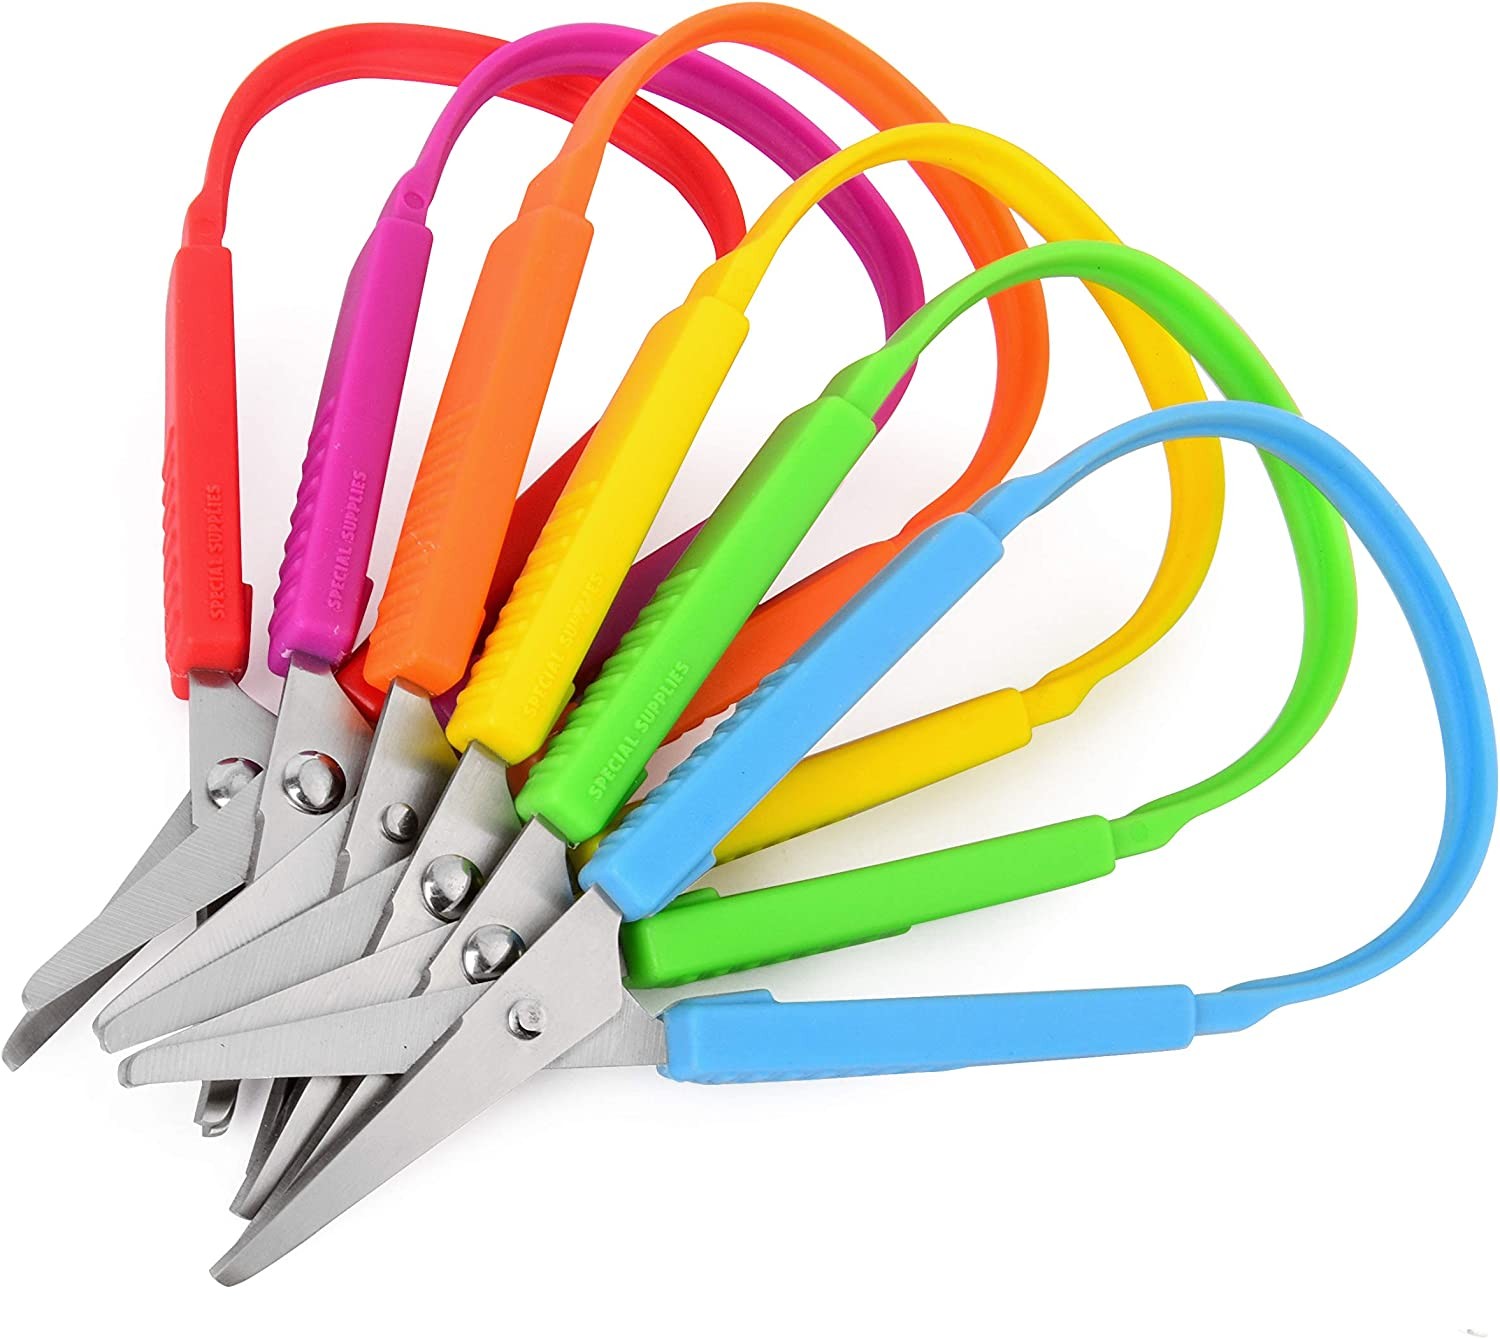  Special Supplies Loop Scissors for Teens And Adults 8 Inches  (3-Pack) Colorful Looped, Adaptive Design, Right and Lefty Support, Small,  Easy-Open Squeeze Handles, Supports Elderly and Special Needs : Arts, Crafts